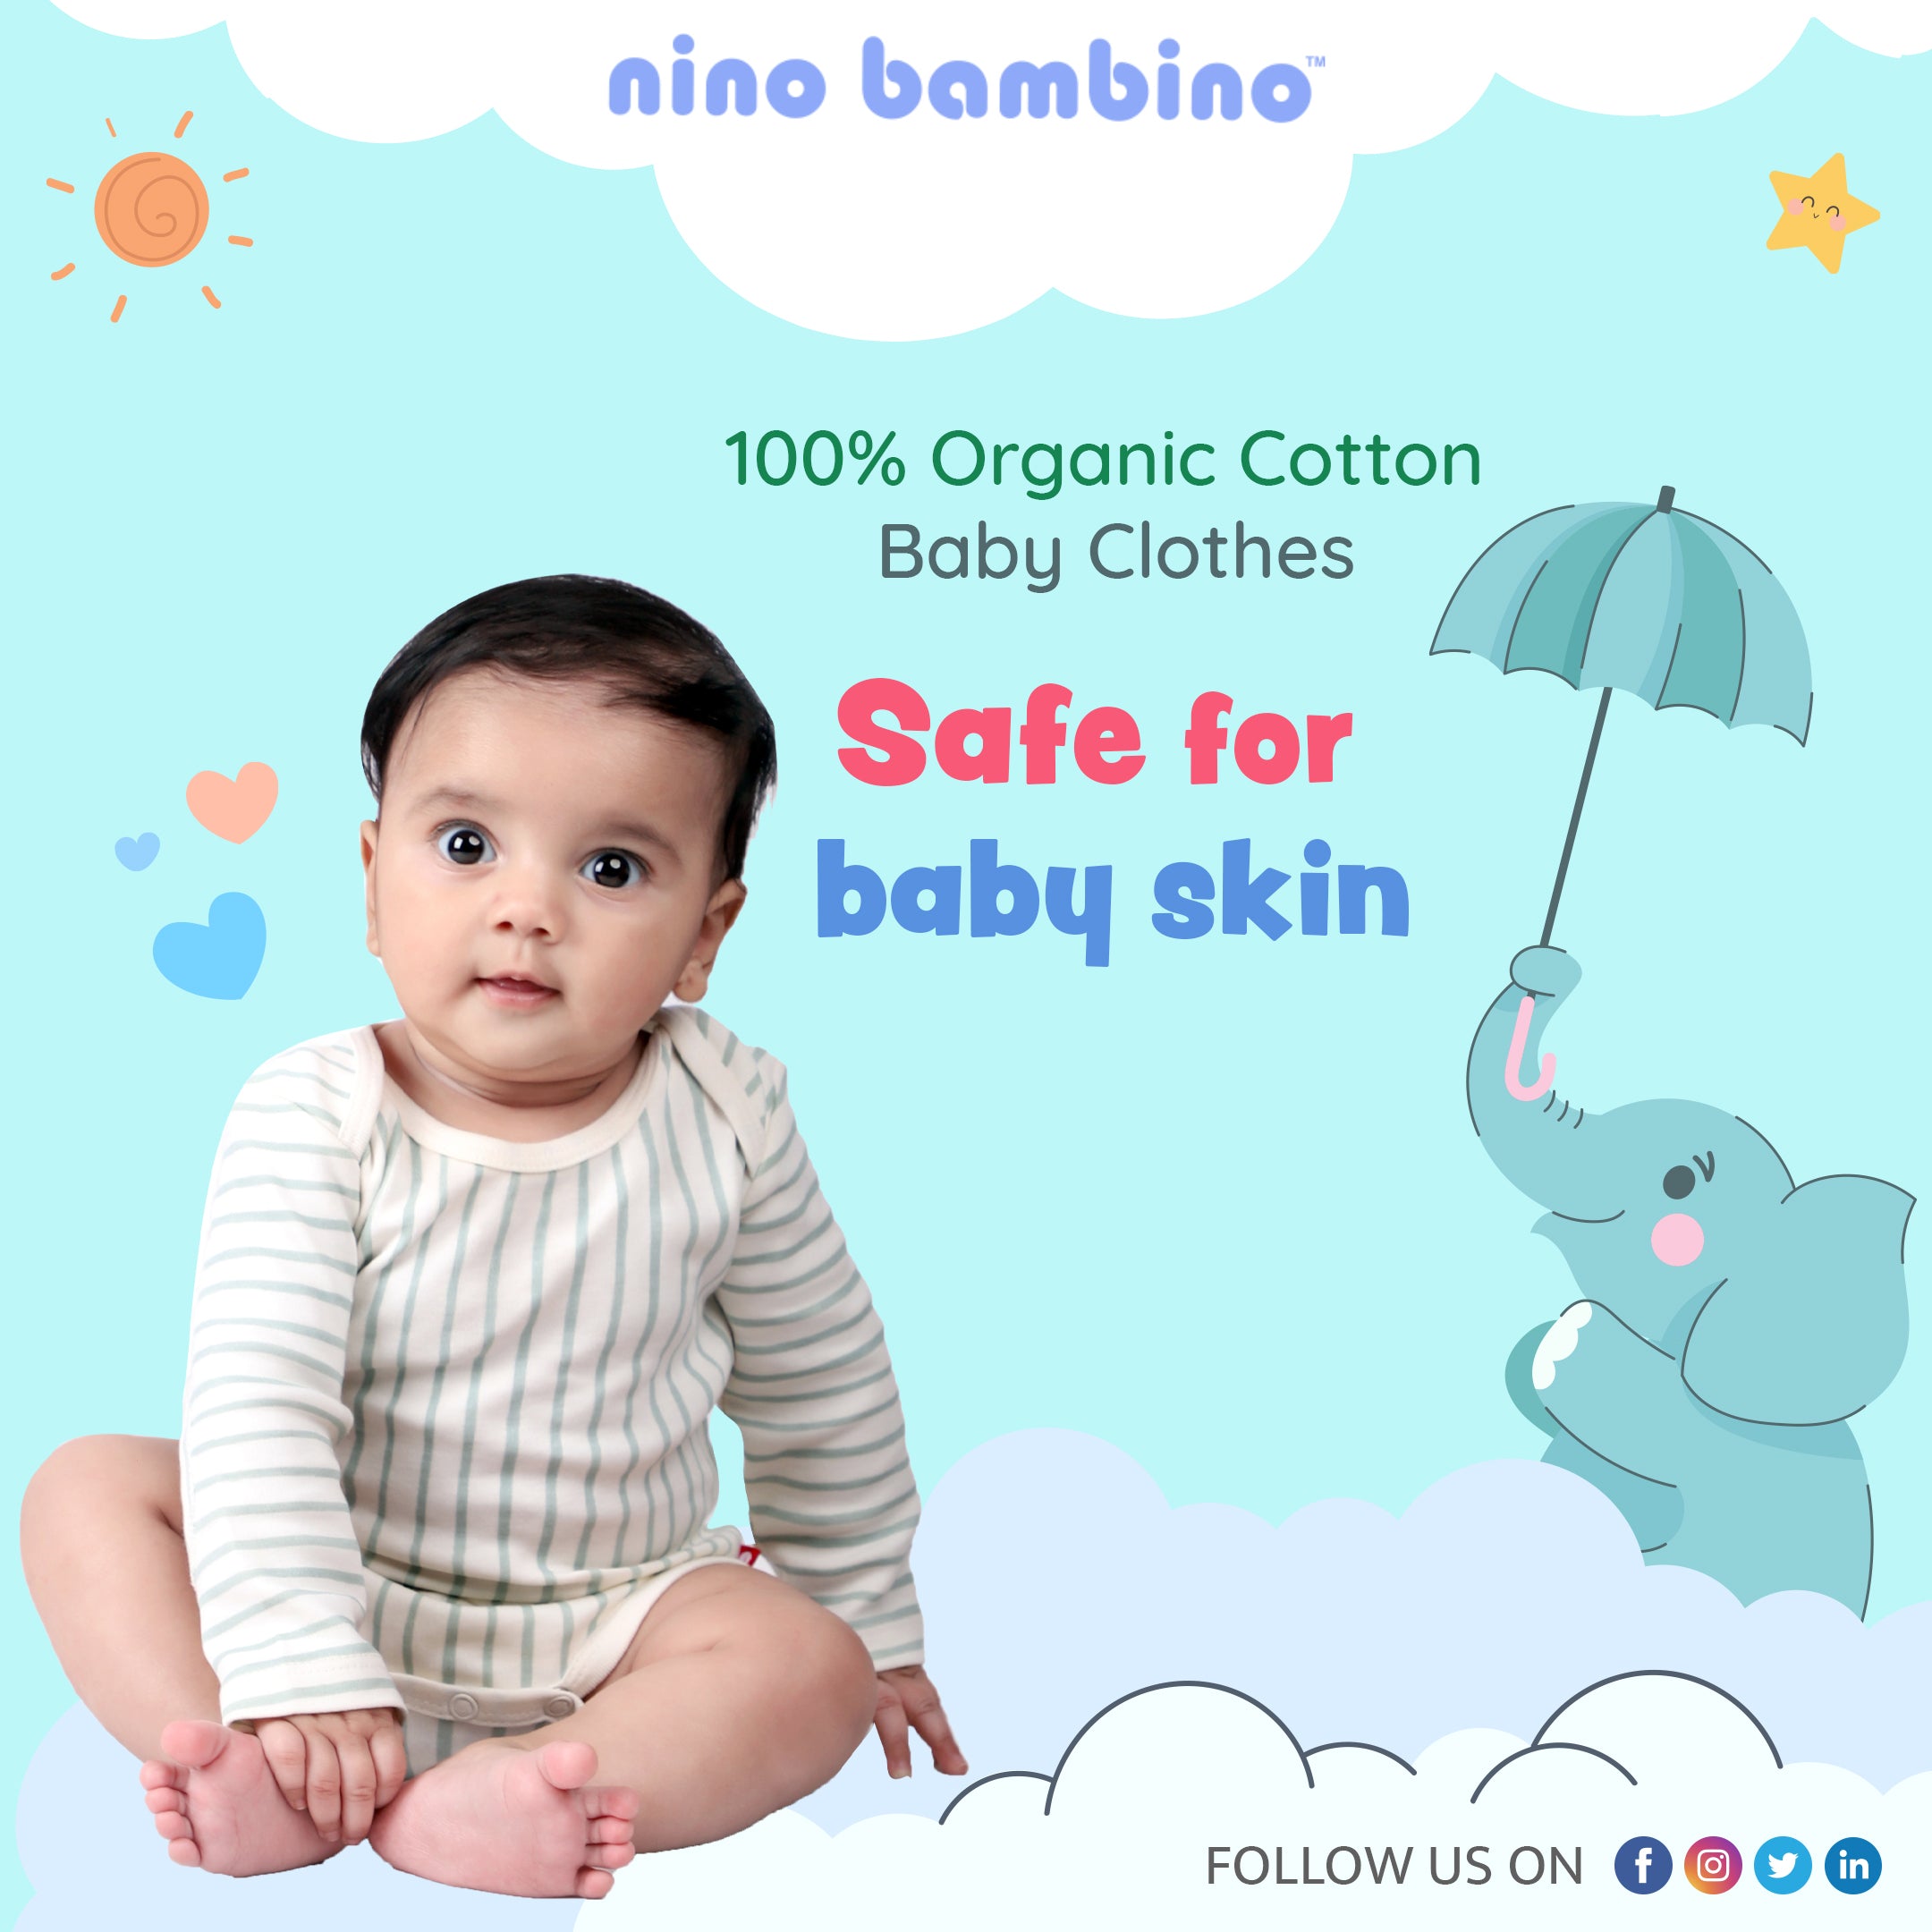 ONLINE BABY STORE |WHY BUY UNISEX ORGANIC BABY CLOTHES FOR YOUR INFANT?